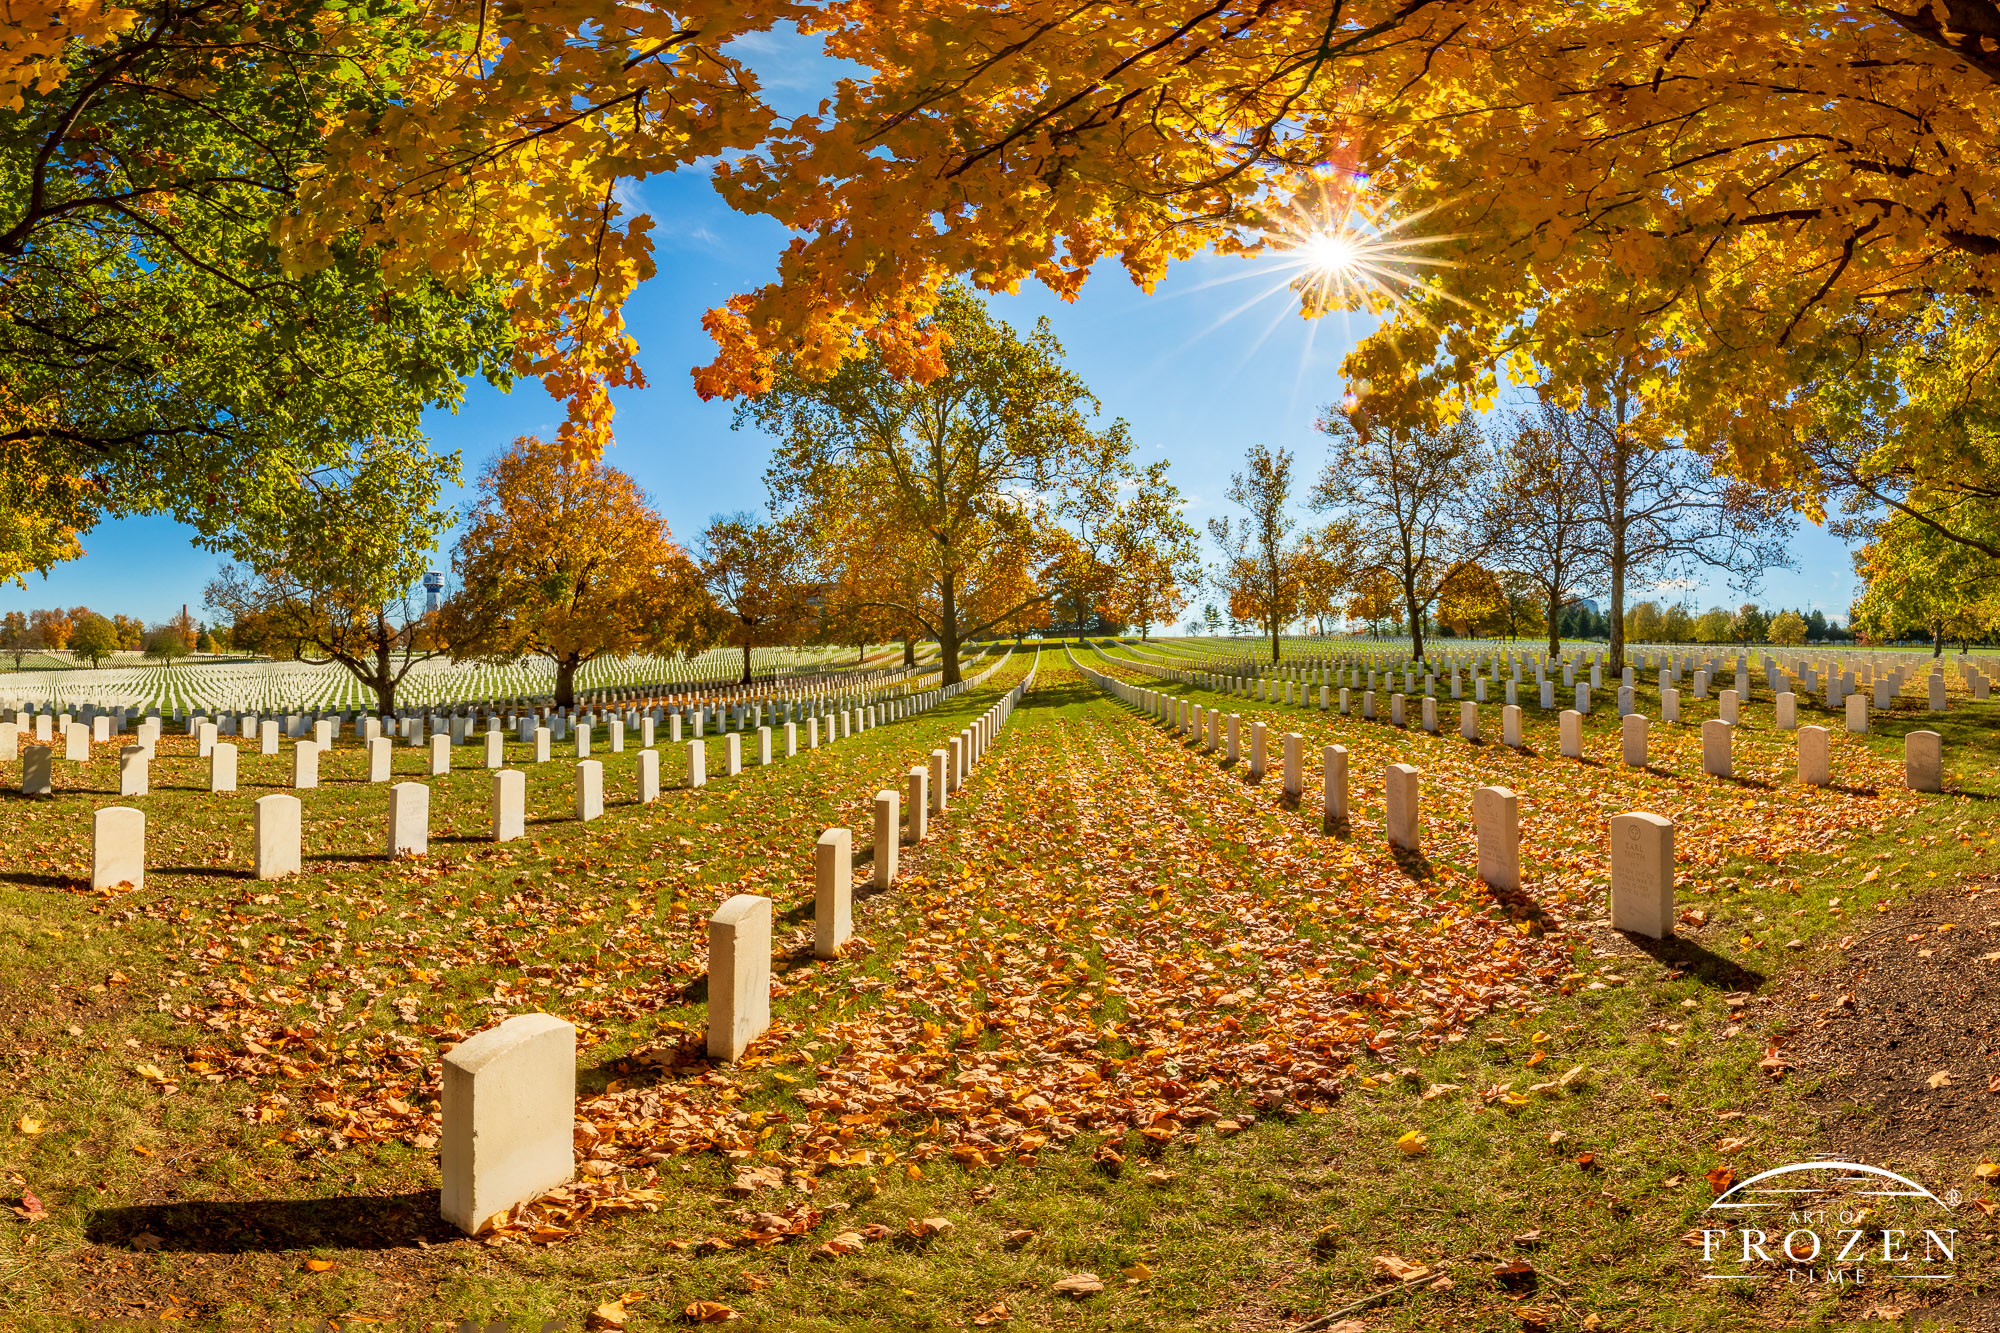 Panoramic image of Dayton National Cemetery on a colorful fall day where the backlit sun illuminated the golden leaves